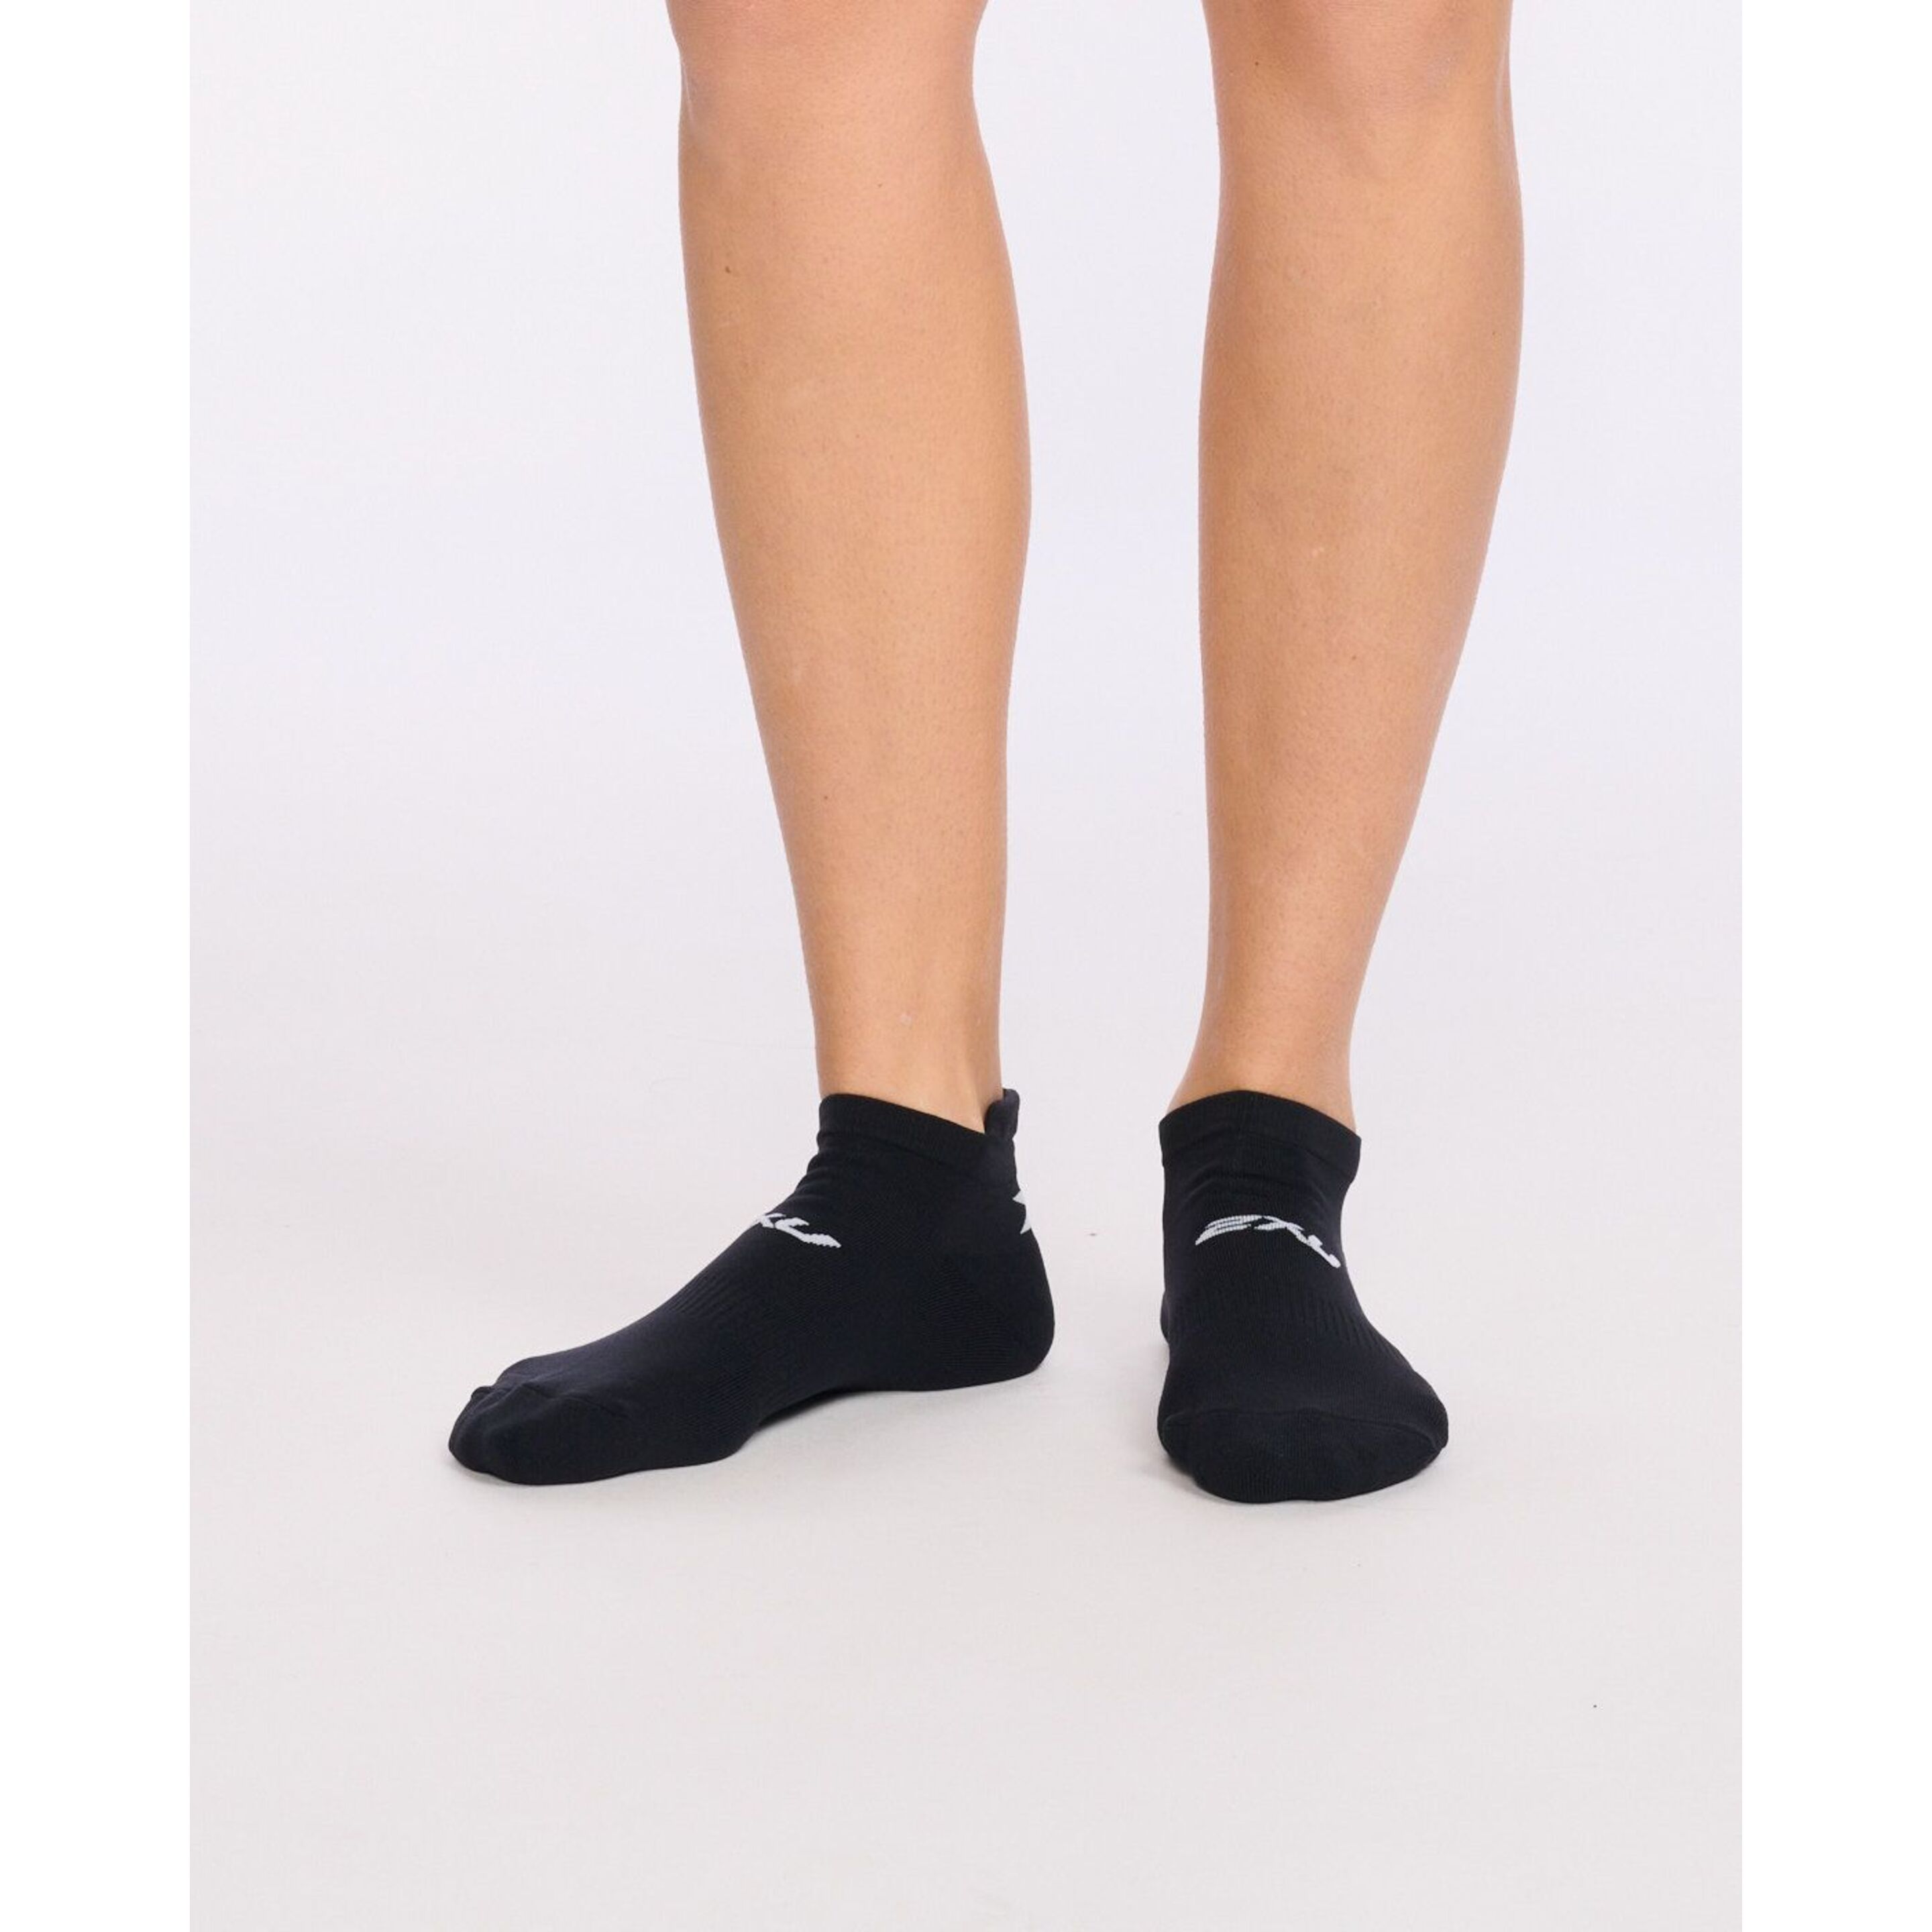 Calcetines 2xu Ankle - negro-blanco - 